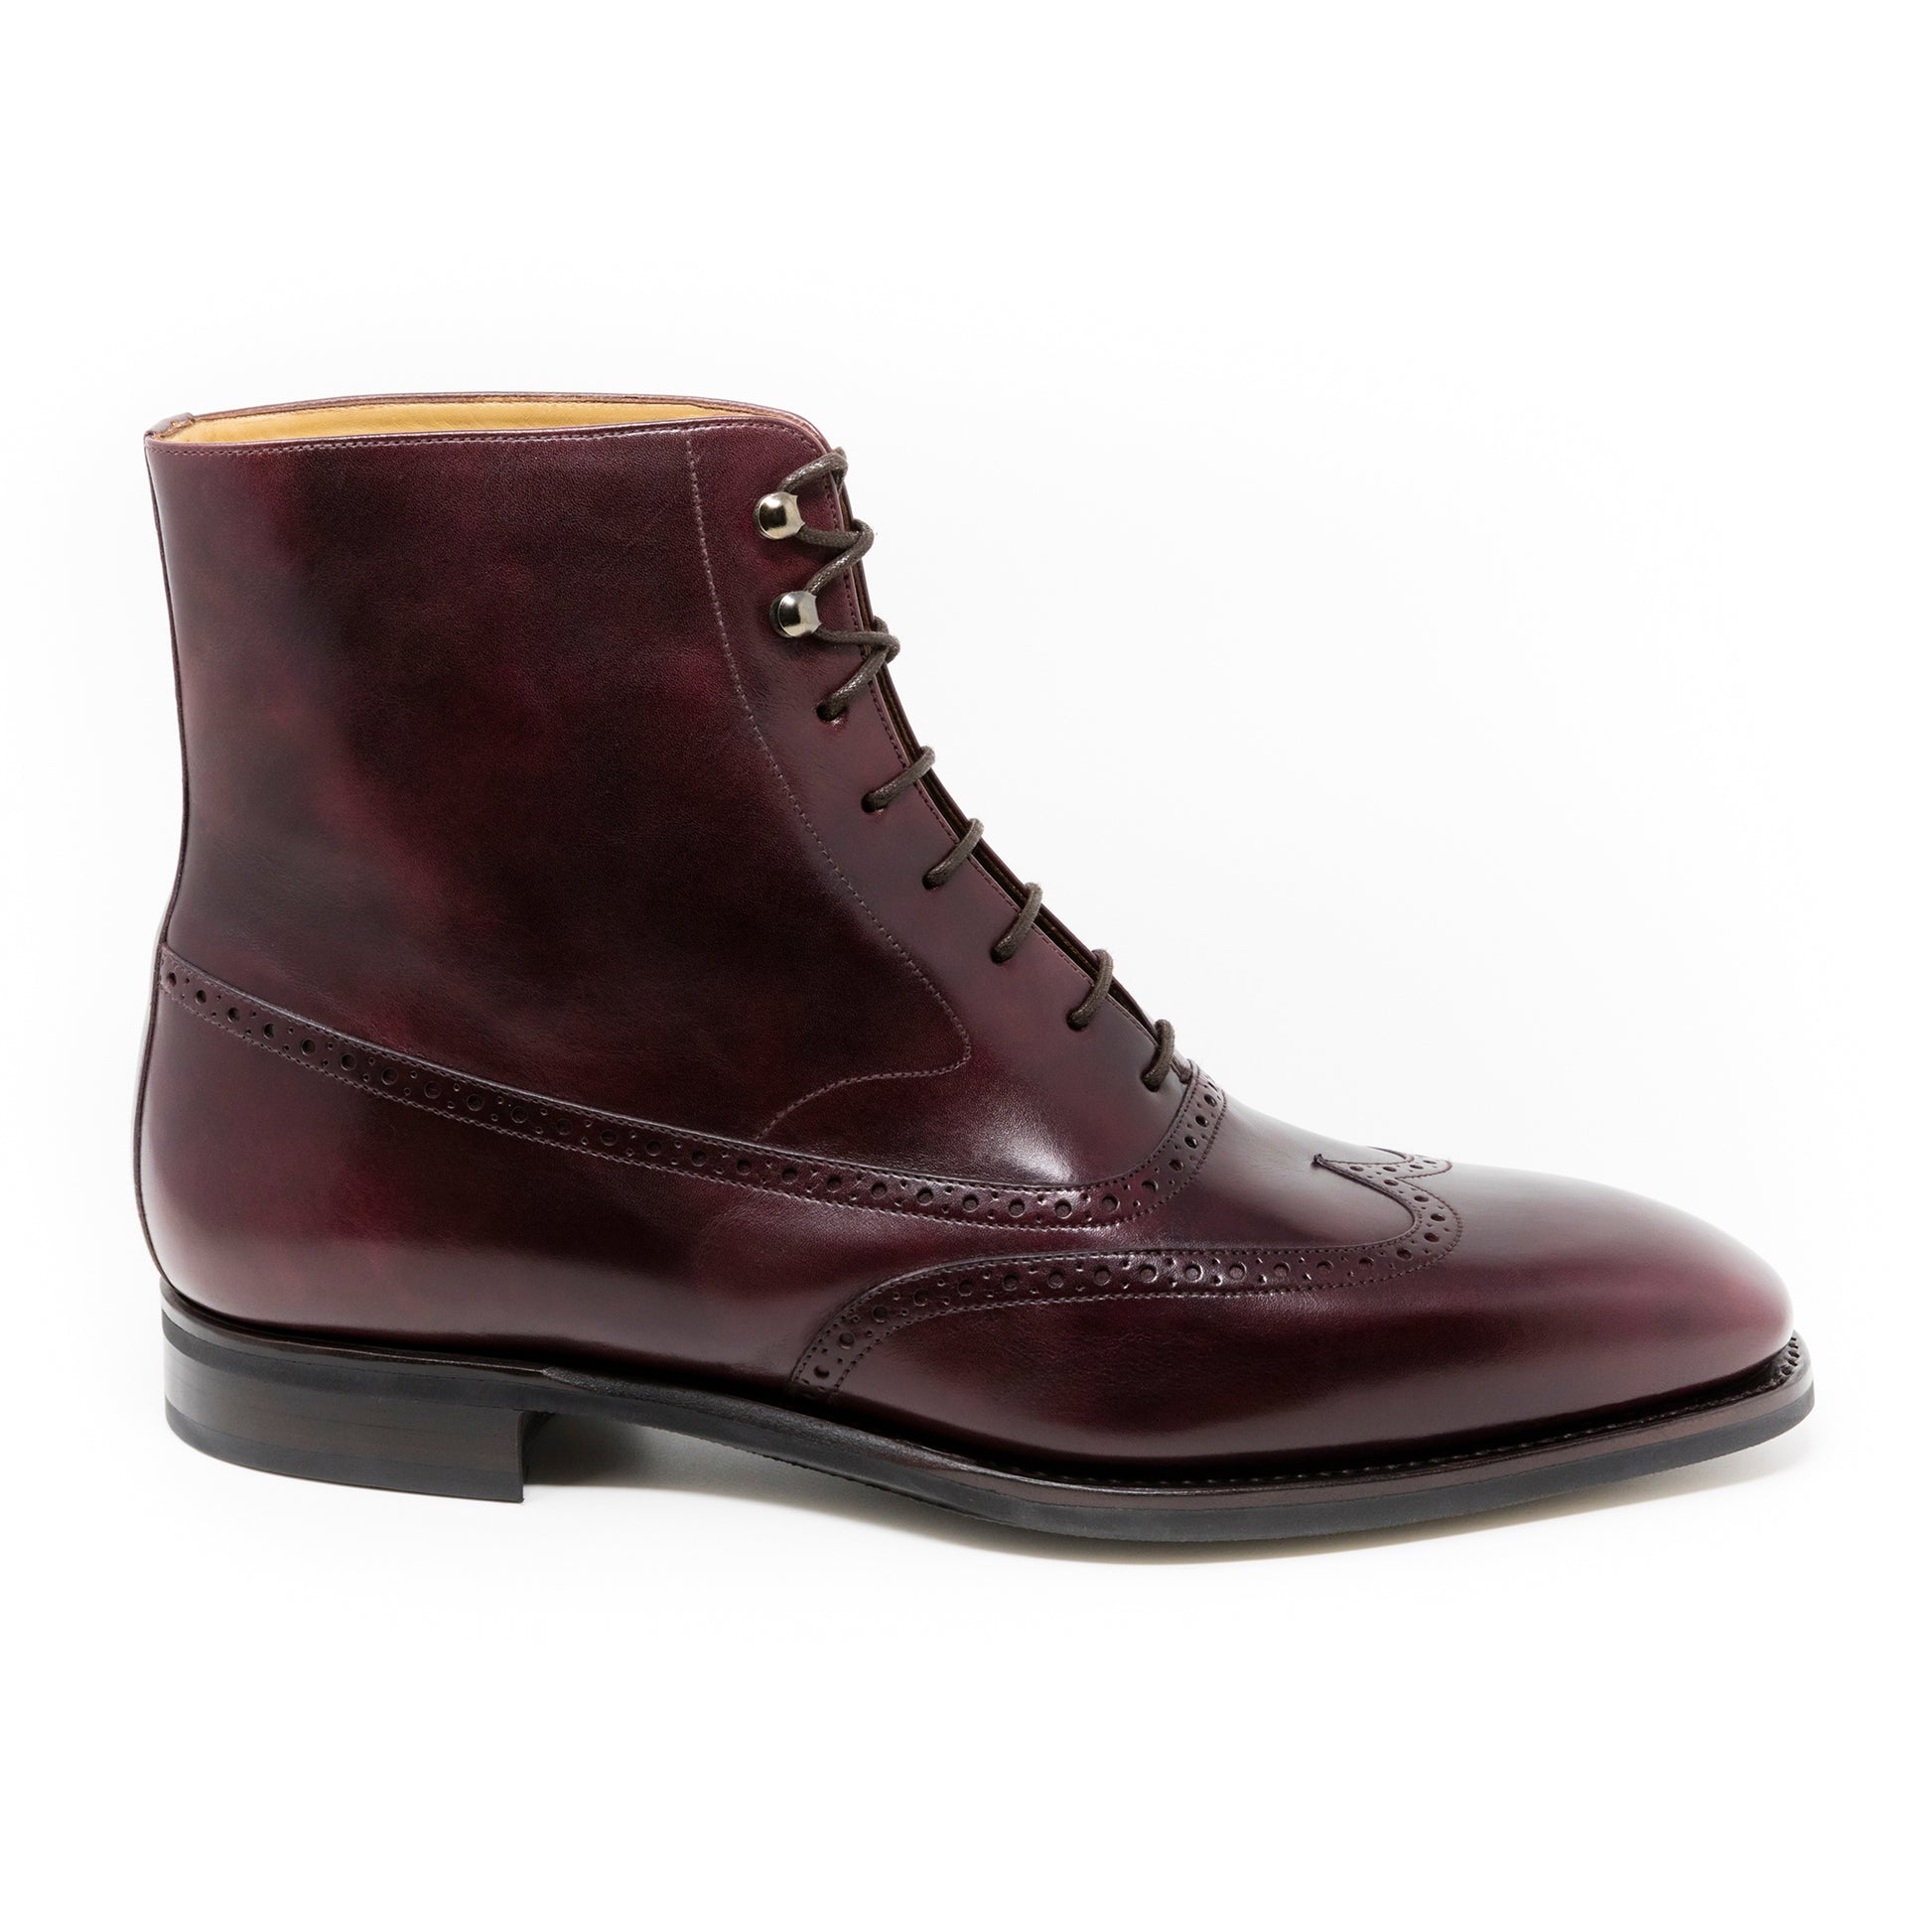 TLB Mallorca leather shoes 181 / PICASSO / MUSEUM CALF BURGUNDY